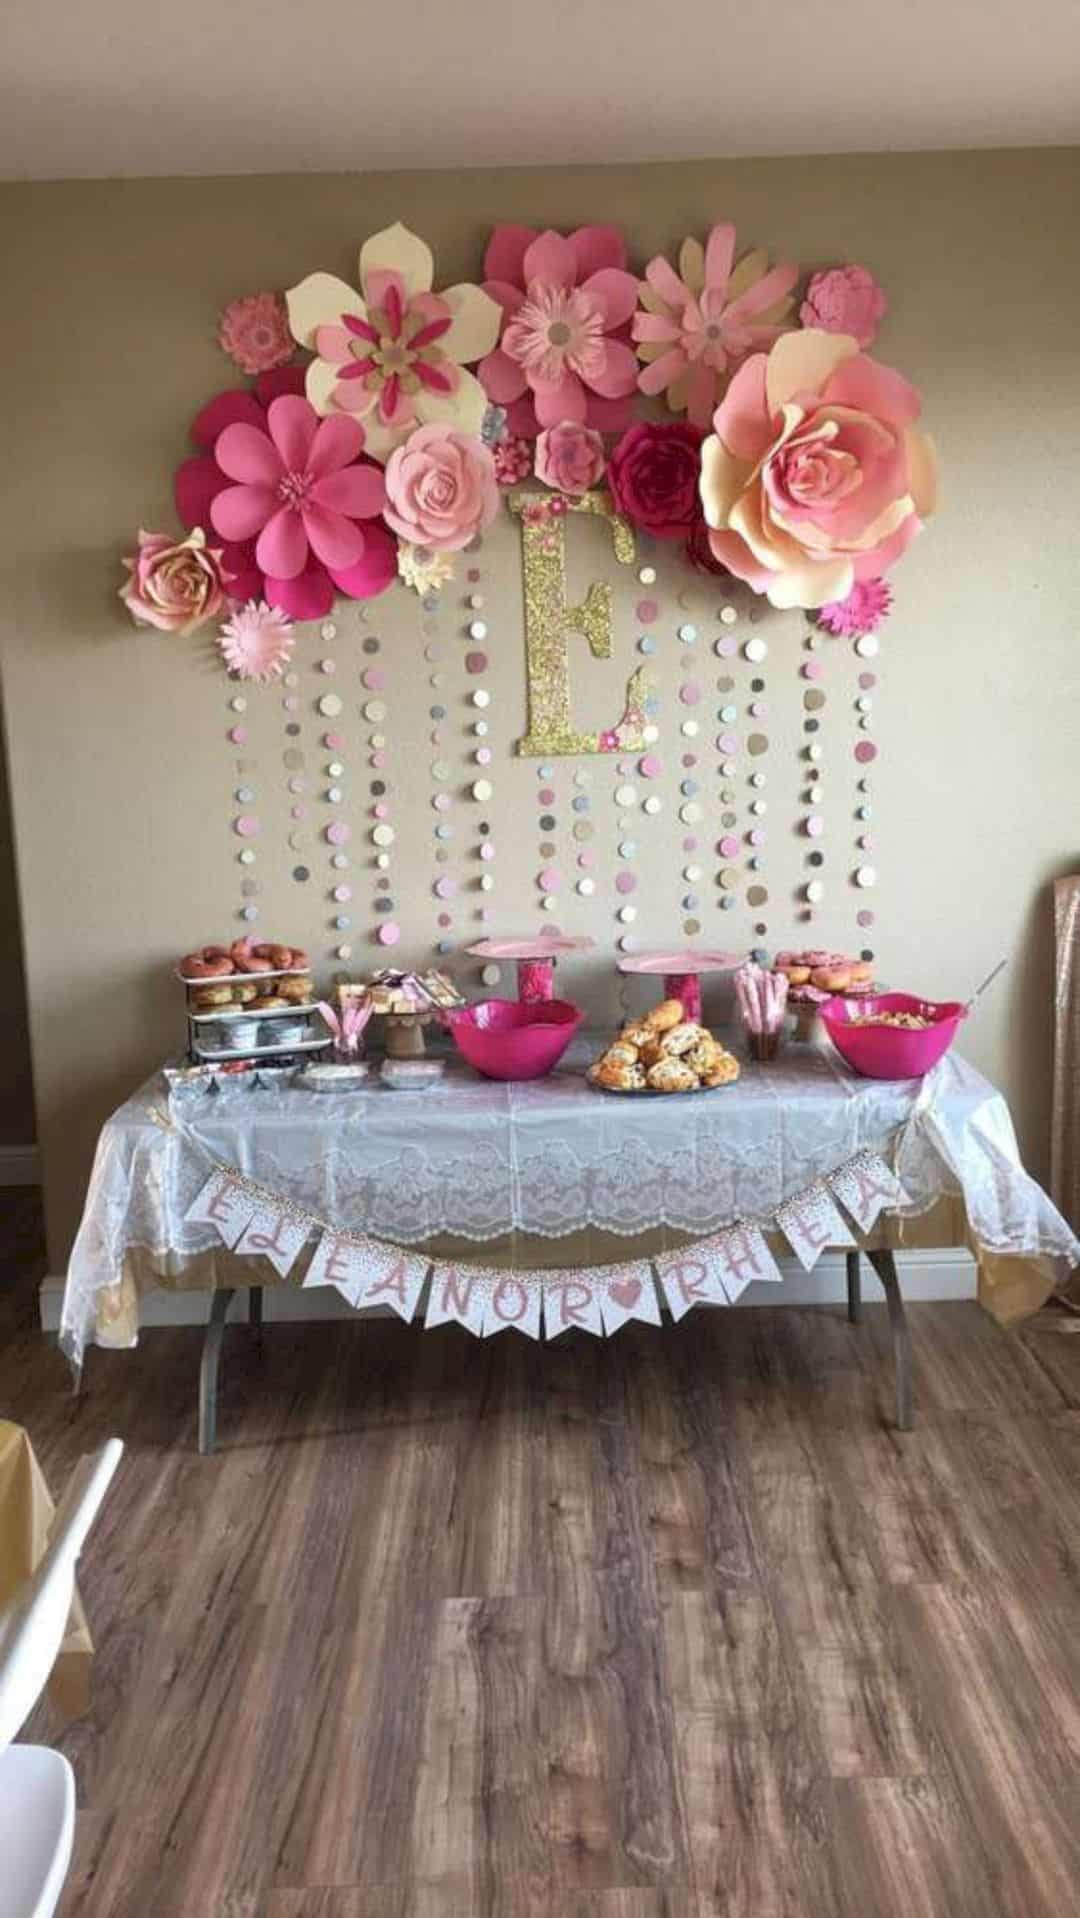 Decoration Ideas For Baby Shower
 16 Cute Baby Shower Decorating Ideas